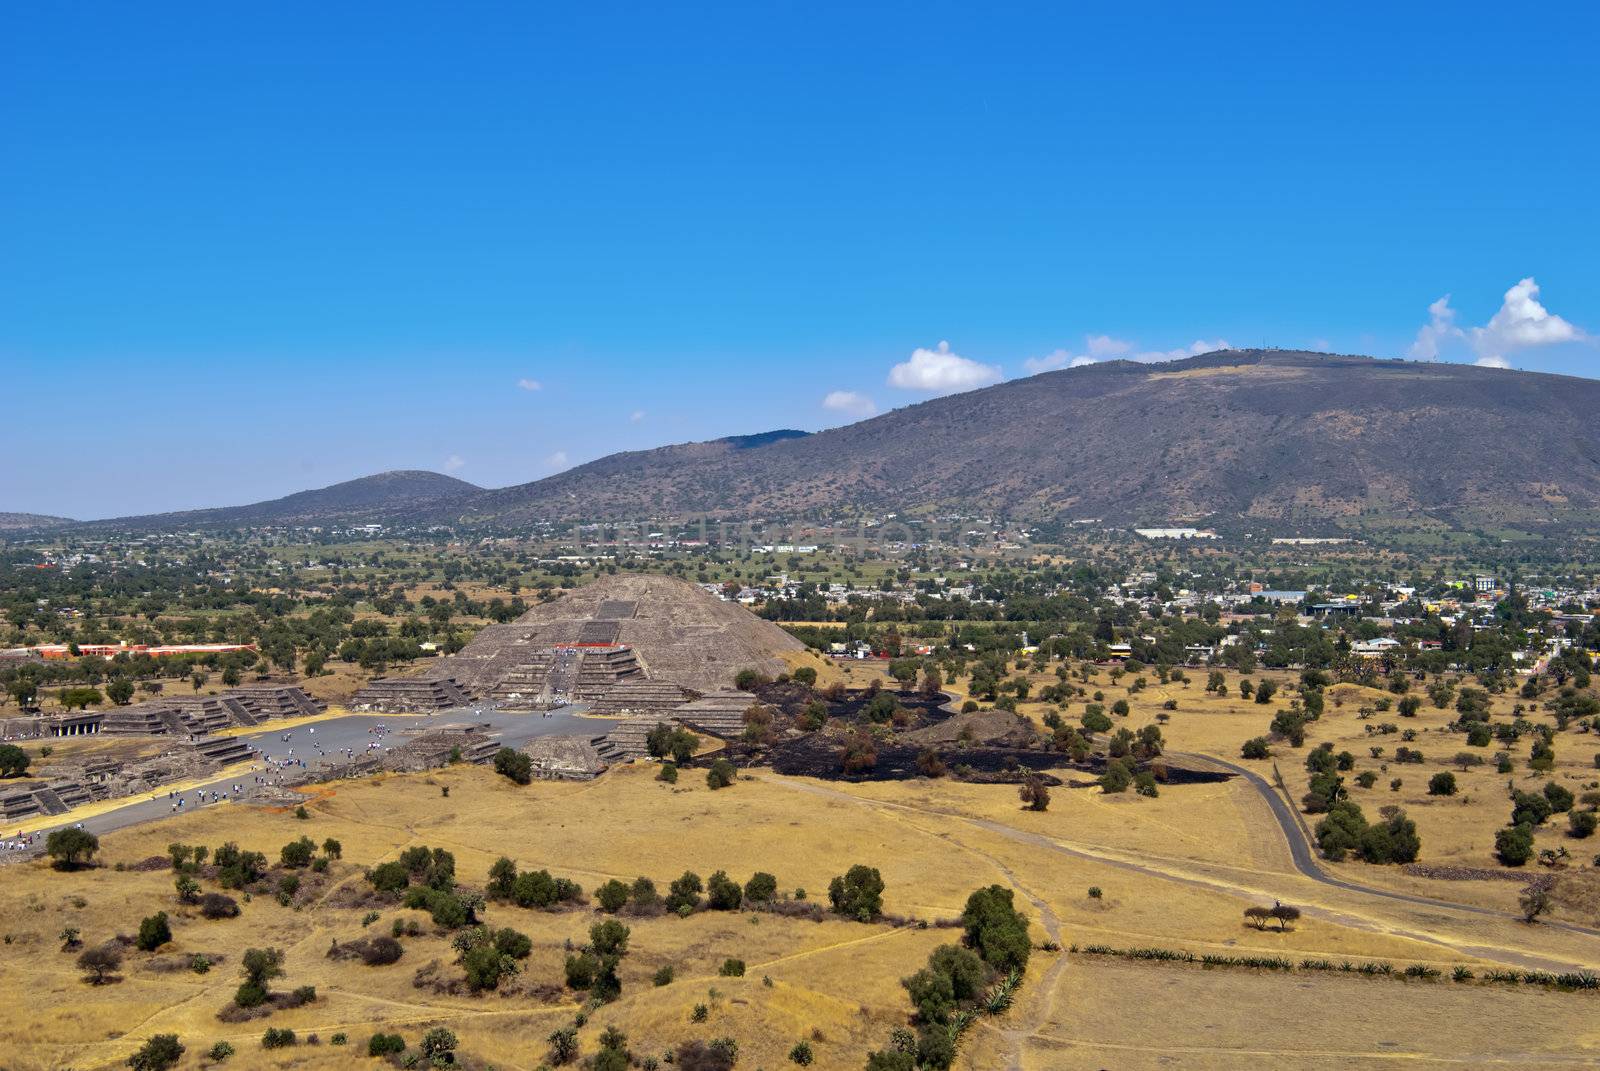 Pyramid of the Moon. View from the Pyramid of the Sun. Avenue of the Dead is the main roadway in the city of Teotihuacan.